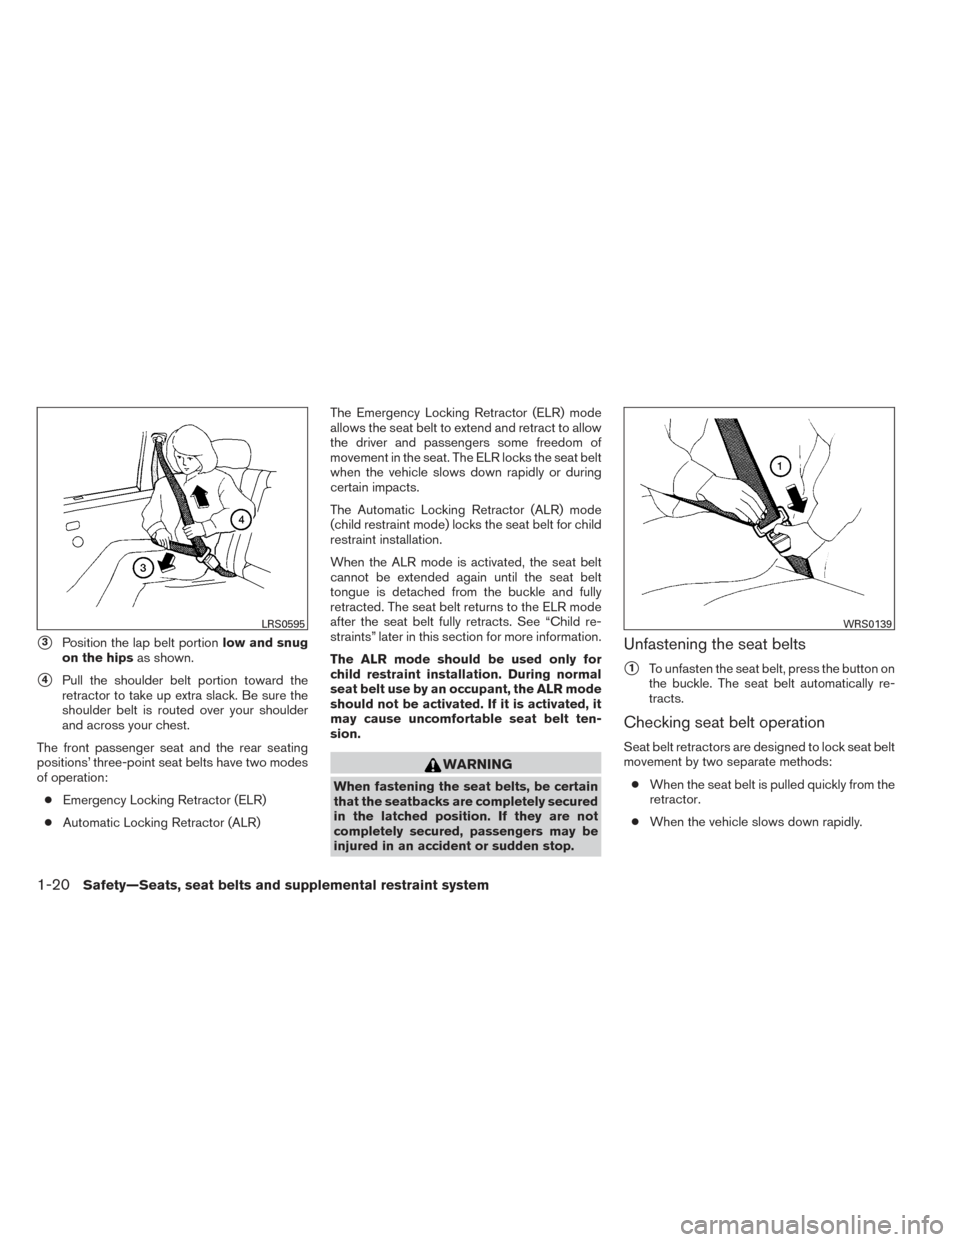 NISSAN ALTIMA 2014 L33 / 5.G Owners Manual 3Position the lap belt portionlow and snug
on the hips as shown.
4Pull the shoulder belt portion toward the
retractor to take up extra slack. Be sure the
shoulder belt is routed over your shoulder
a